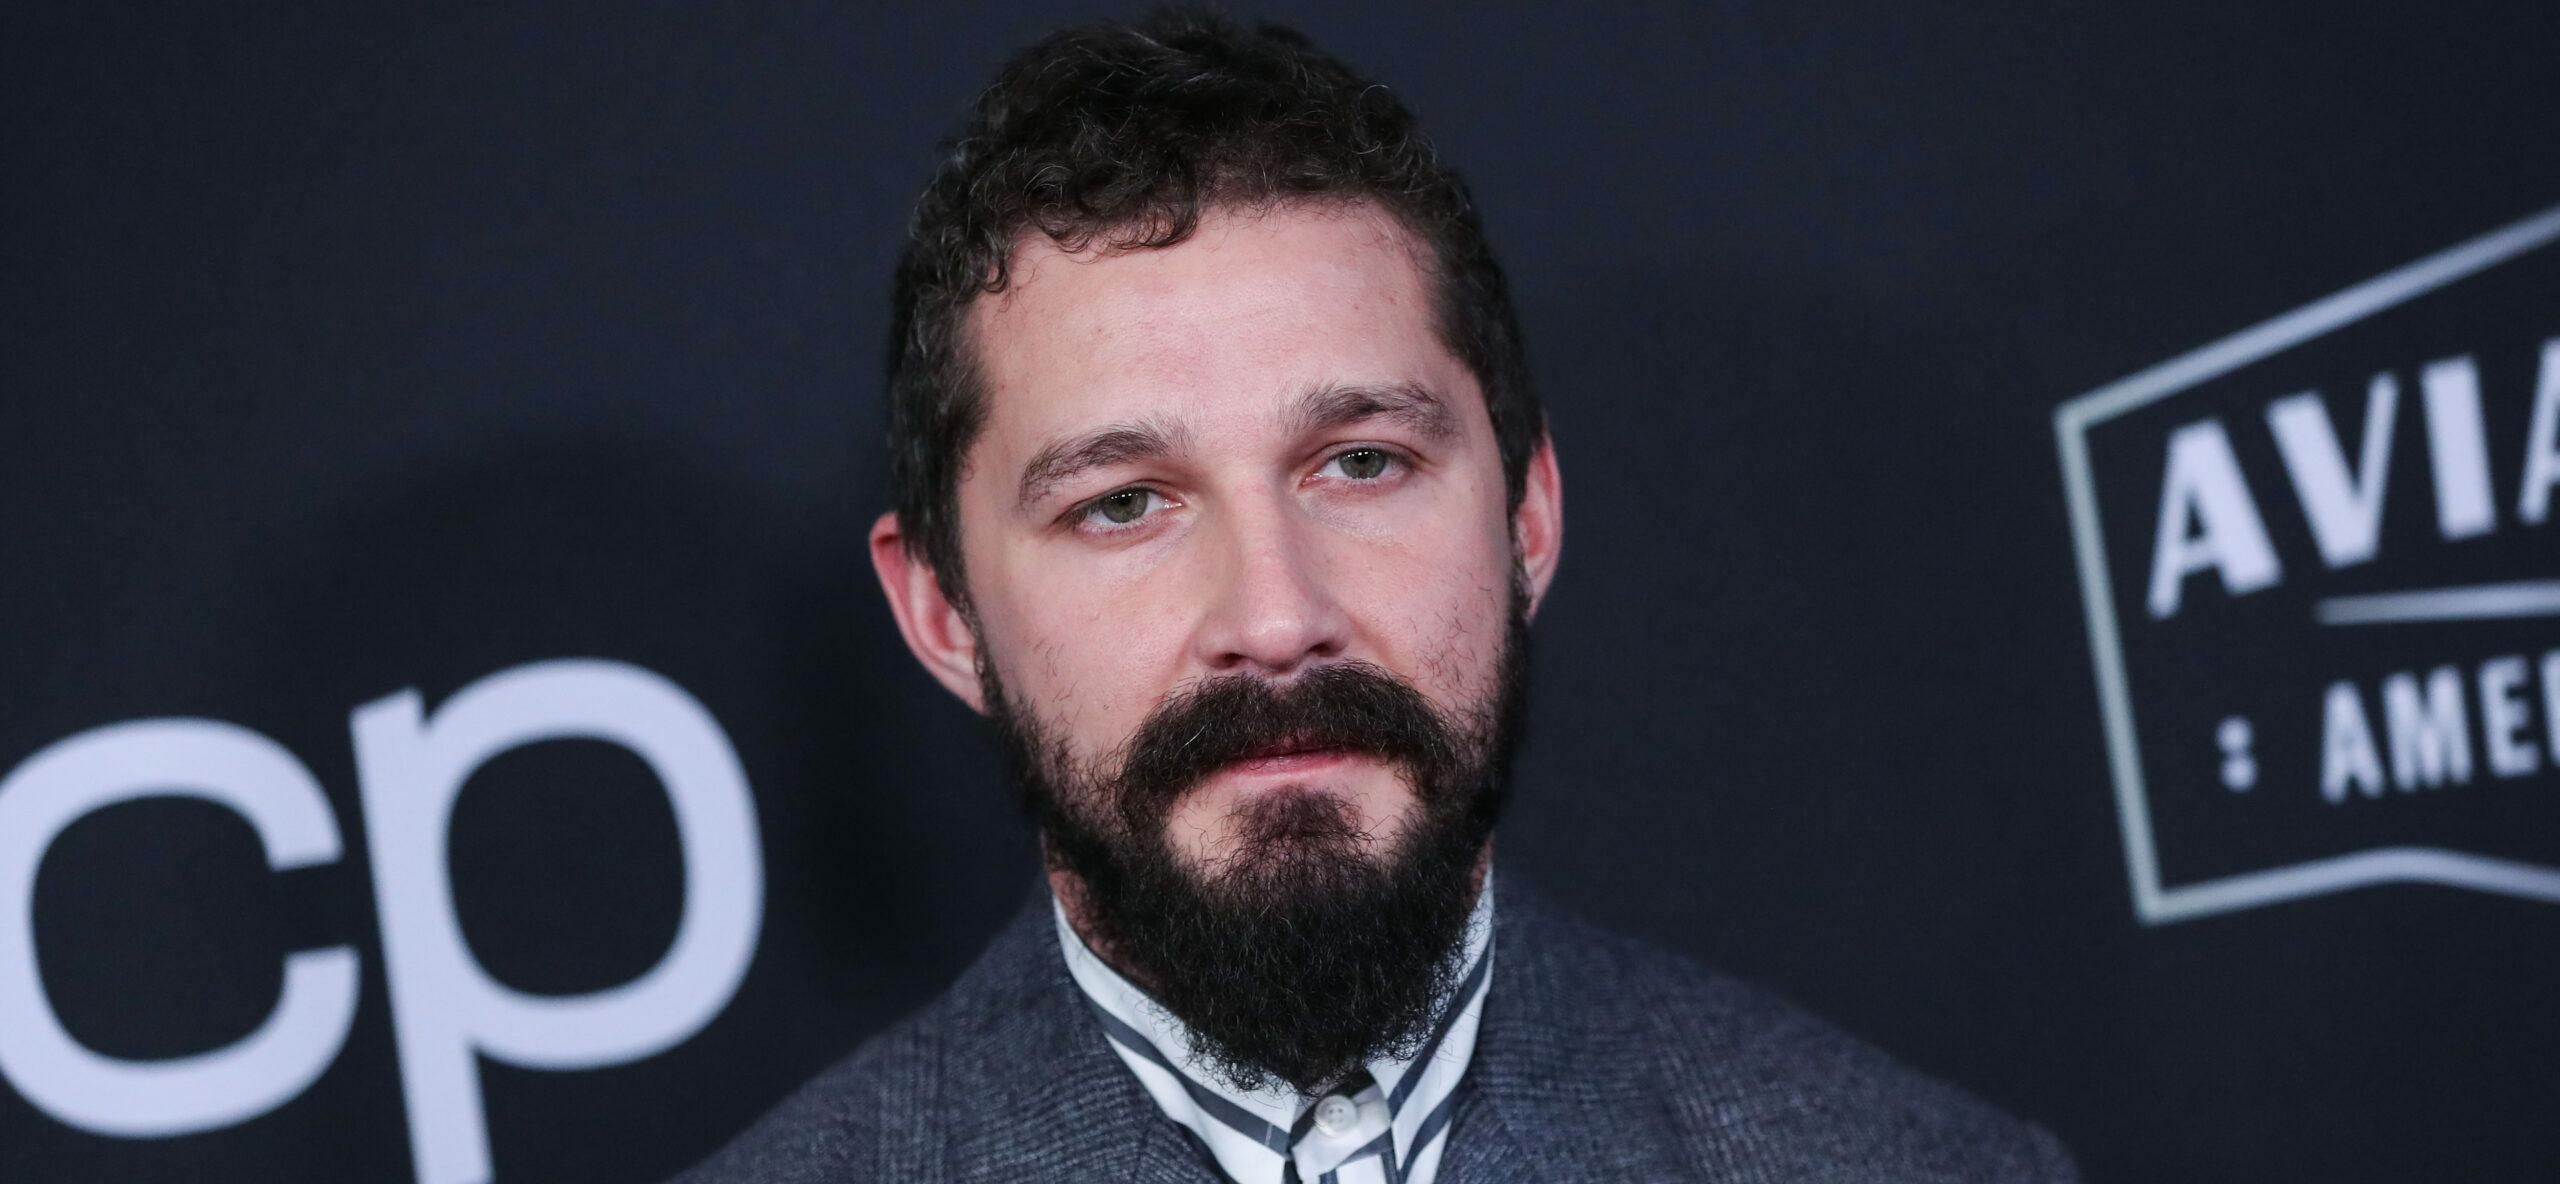 Shia LaBeouf at the 23rd Annual Hollywood Film Awards.